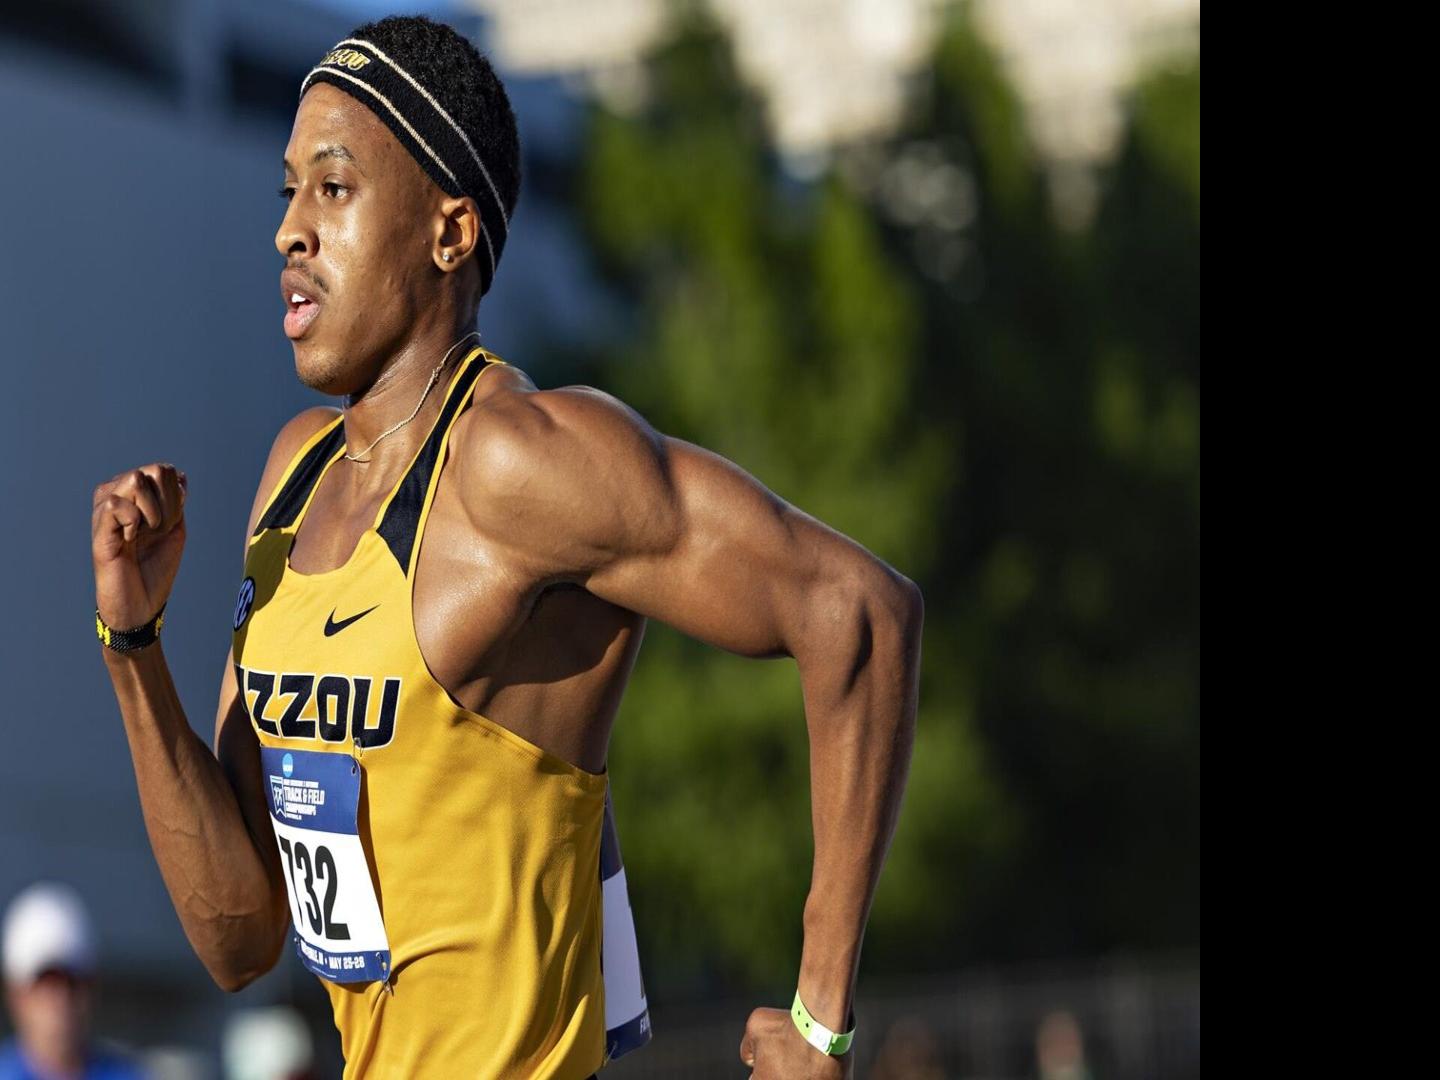 Mizzou track and field prepped for NCAA Outdoor Championships